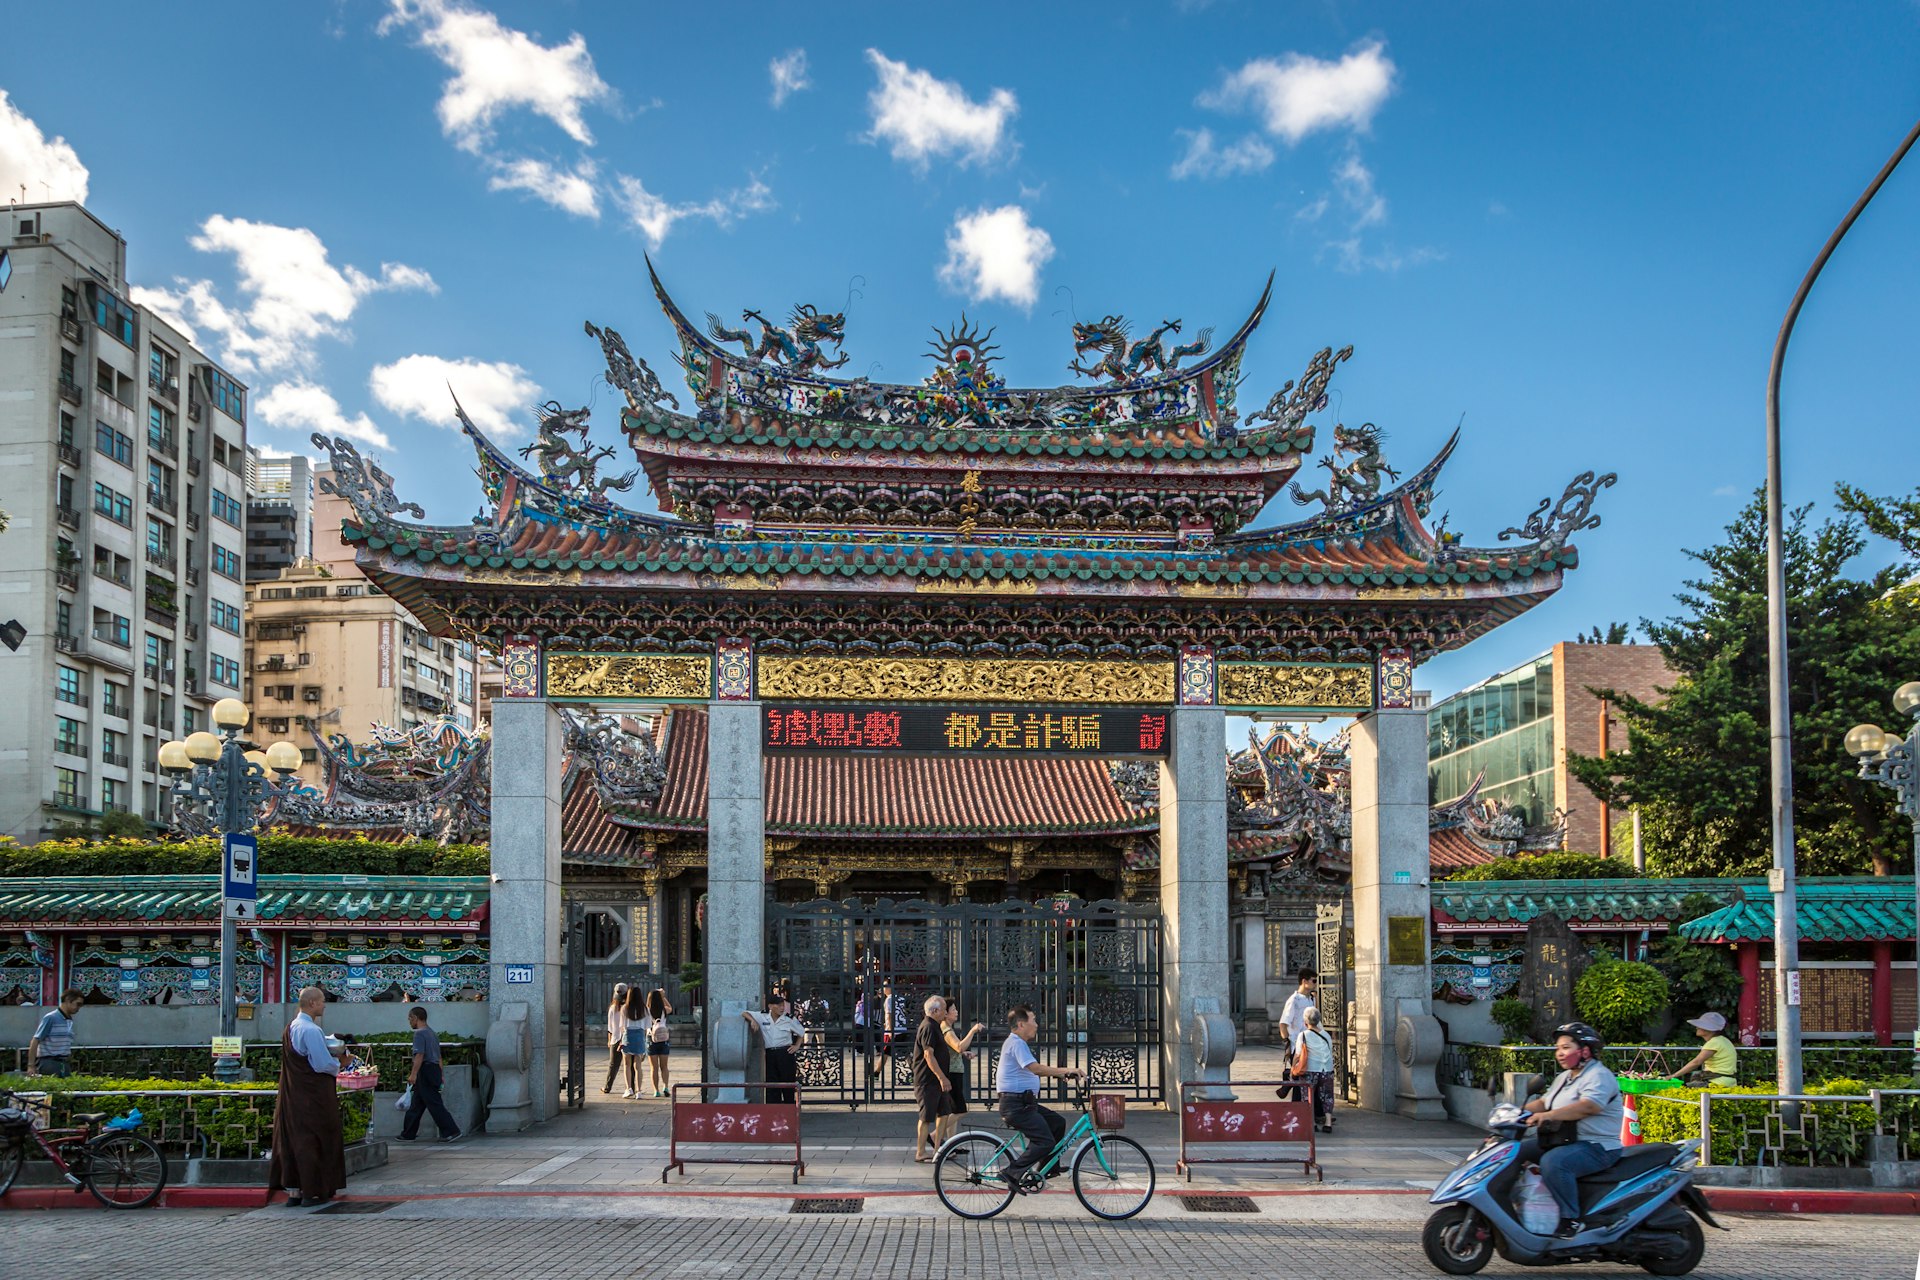 A cyclist pedals past the ornate gate of Longshan Temple, Taipei, Taiwan